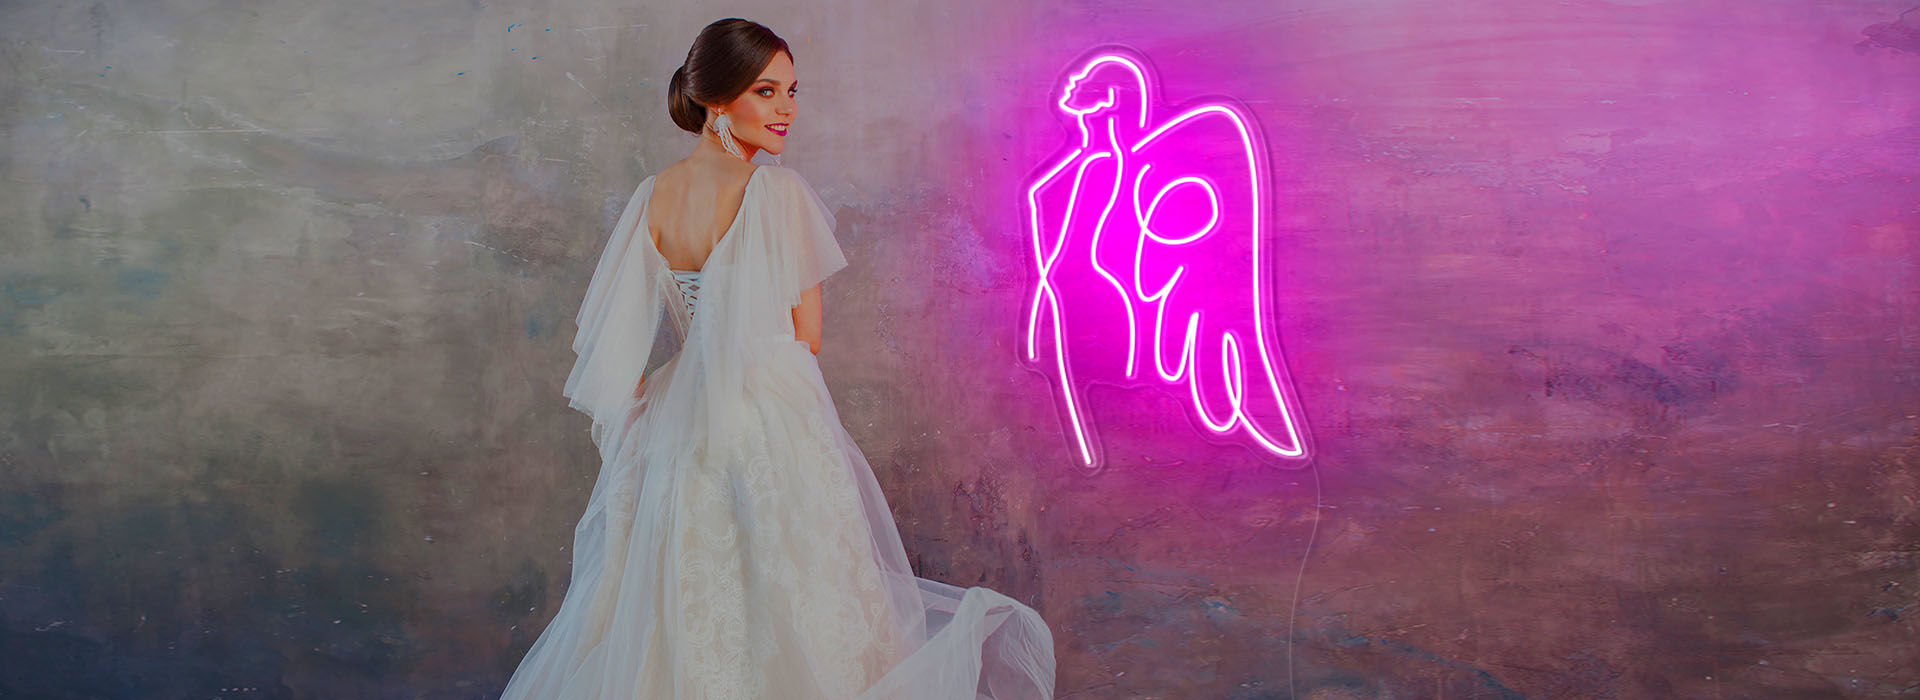 best gifts for mum-angel neon light sign